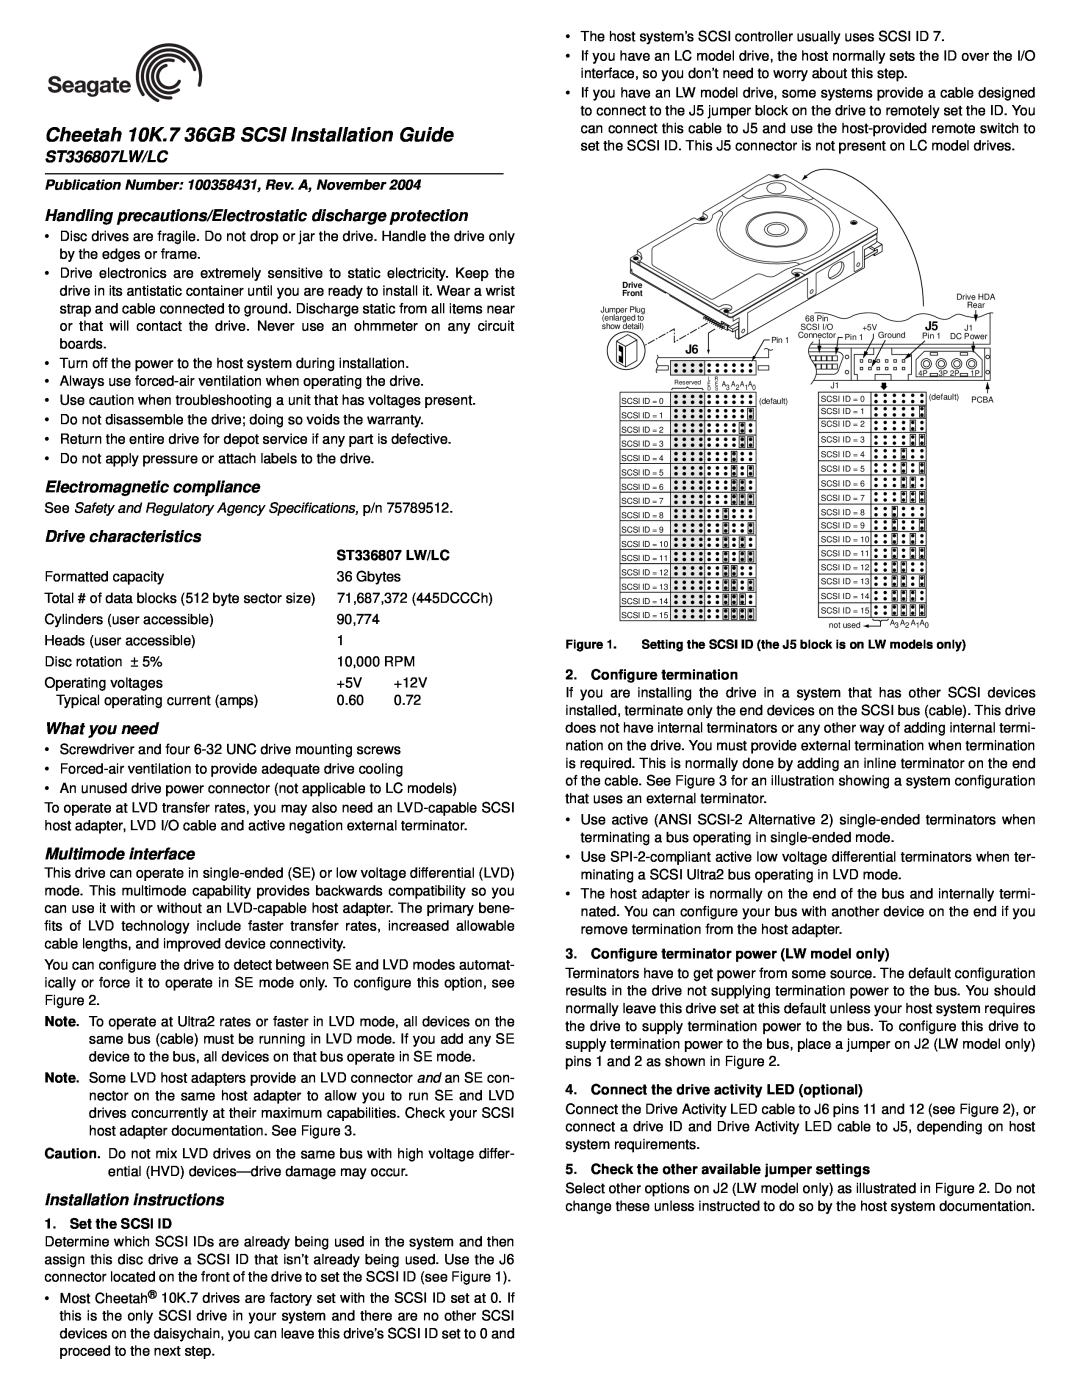 Seagate ST336807LW/LC installation instructions Electromagnetic compliance, Drive characteristics, What you need 